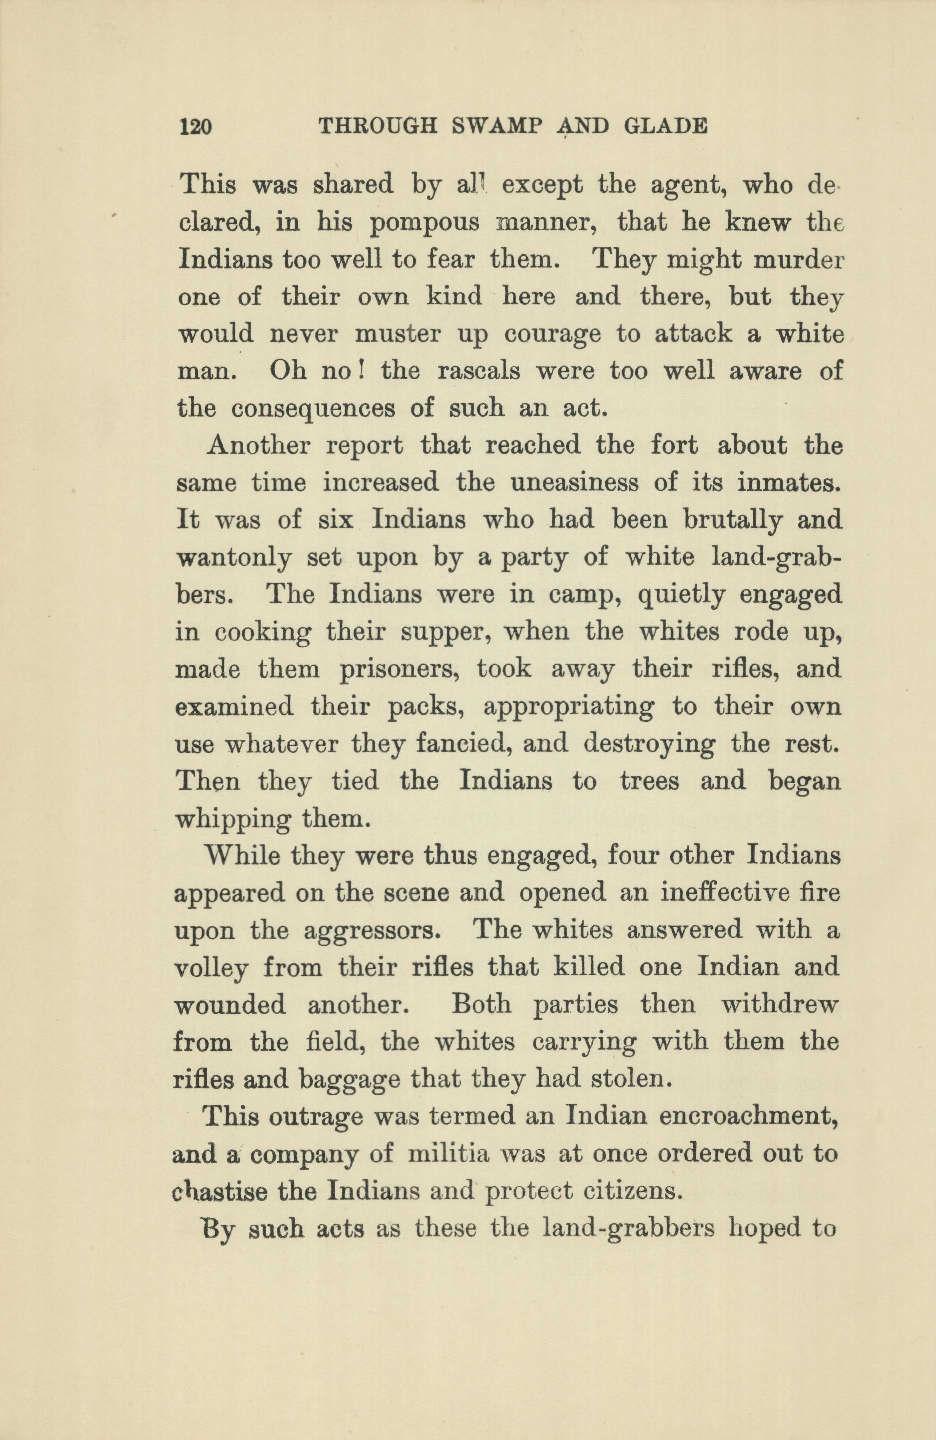 120 THROUGH SWAMP AND GLADE This was shared by all except the agent, who declared, in his pompous manner, that he knew the Indians too well to fear them.